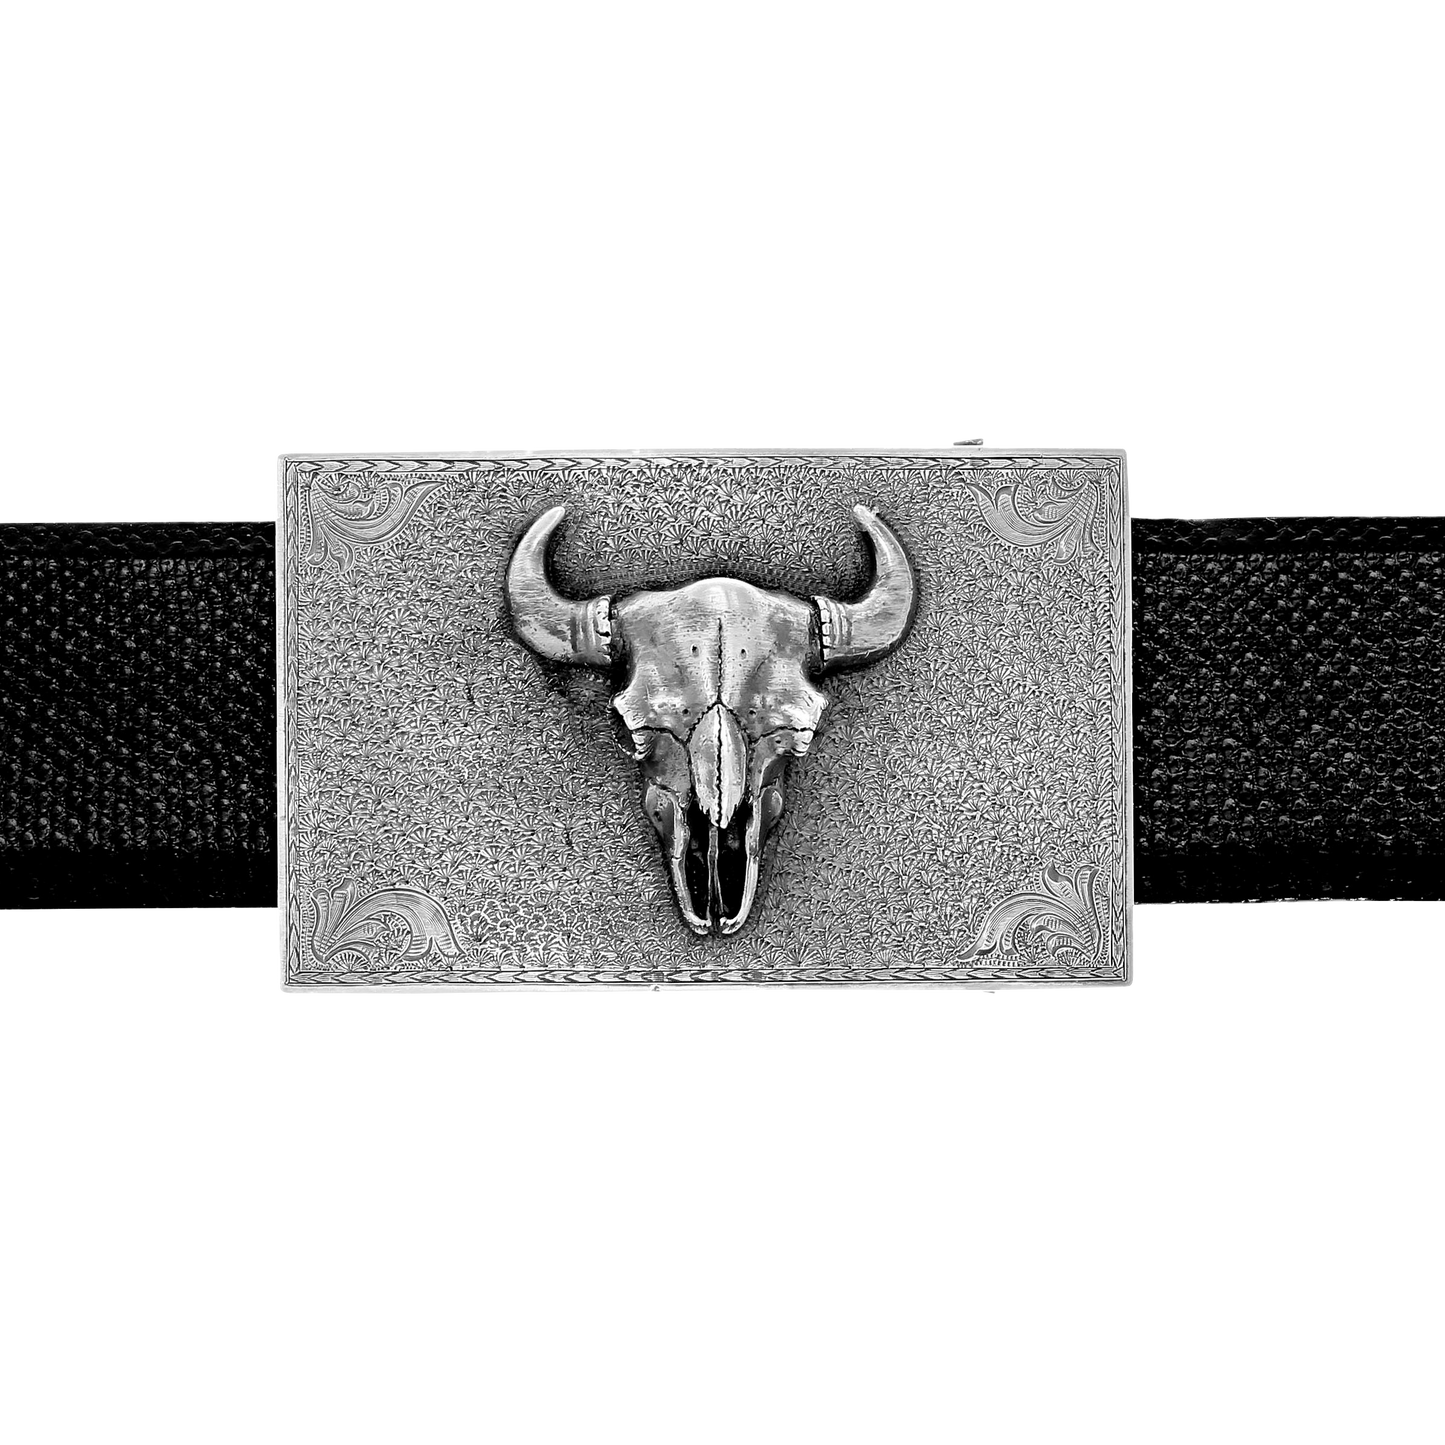 Clint Orms 1.5" Silver Bison Trophy Buckle